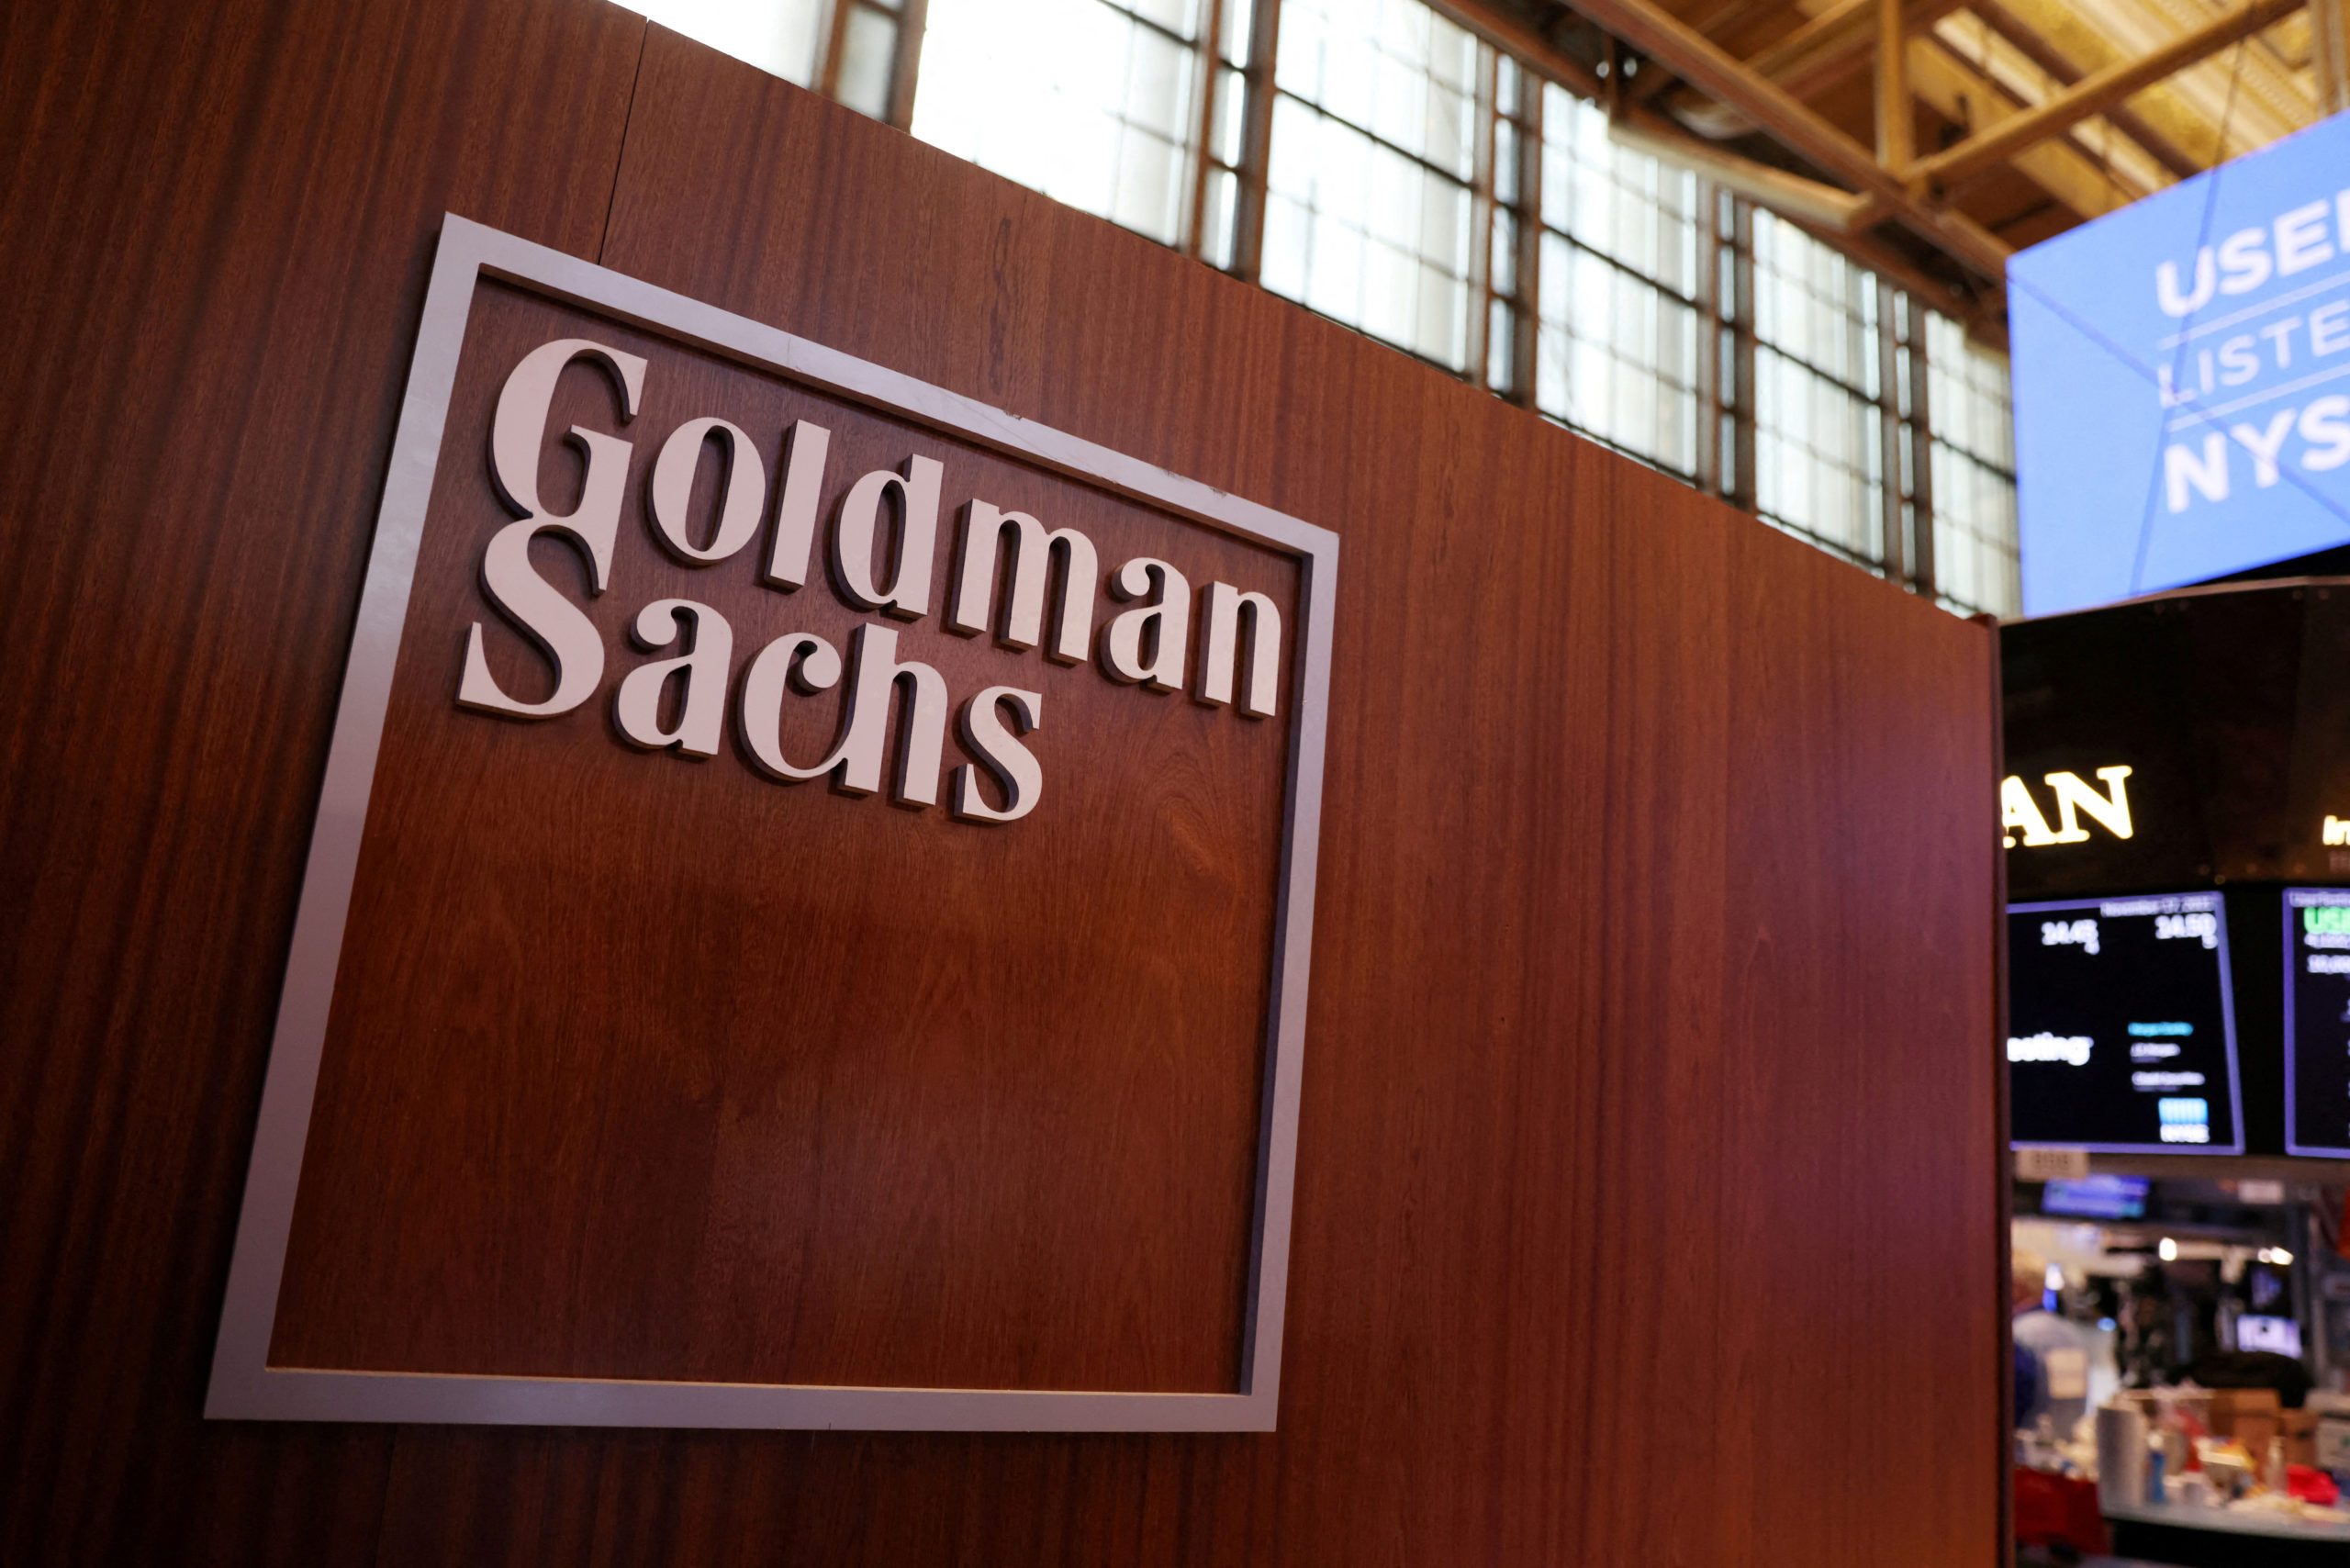 Malaysian govt reviewing $3.9b settlement deal with Goldman Sachs